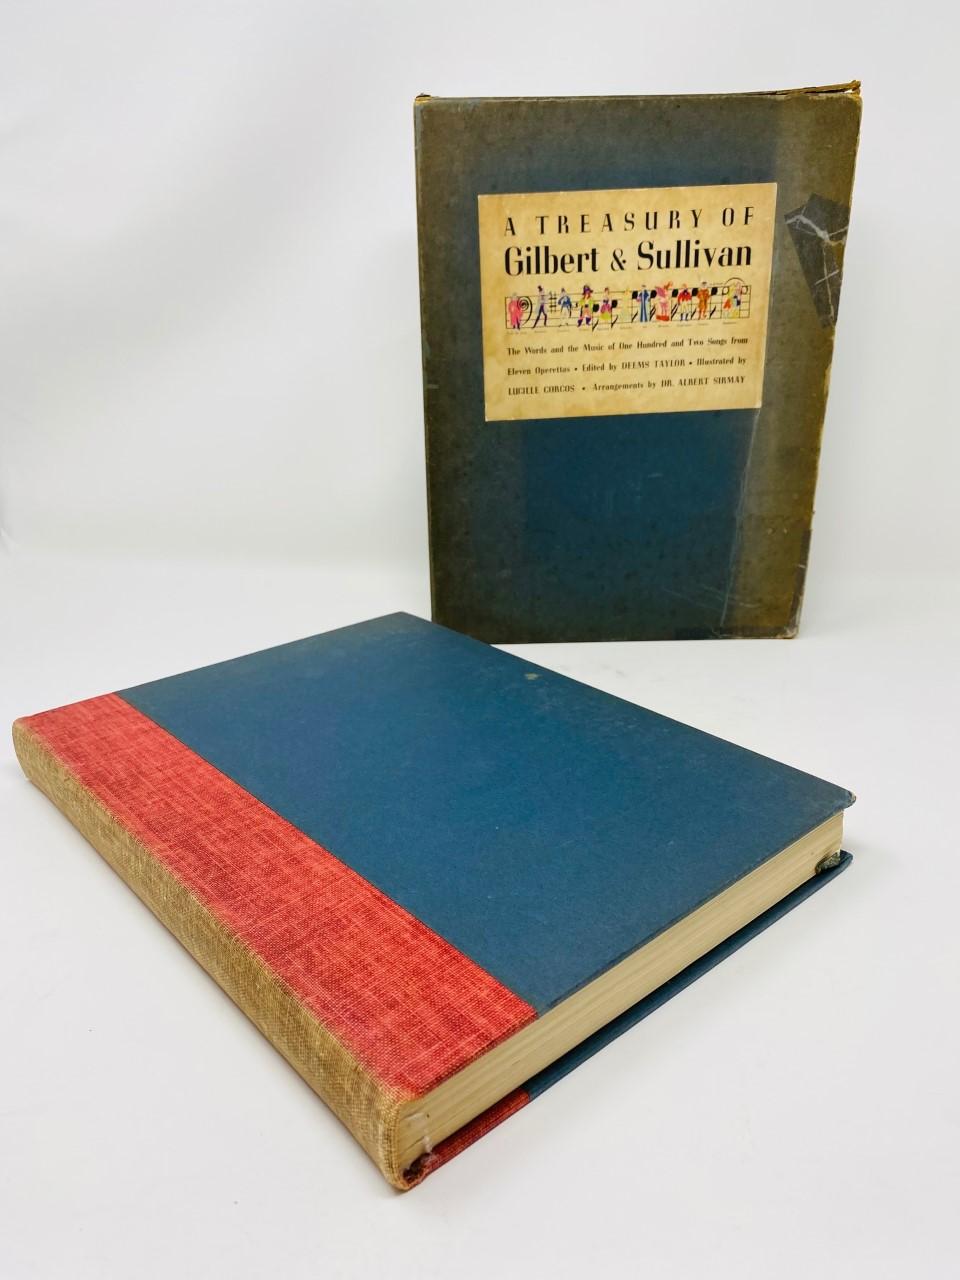 Title: A Treasury of Gilbert and Sullivan
The words and music of one hundred and two songs from eleven operettas
Edited: Deems Taylor
Publisher: Simon and Schuster
Copyright: 1941
With outer box cover. See photos
Hardcover book is in very good